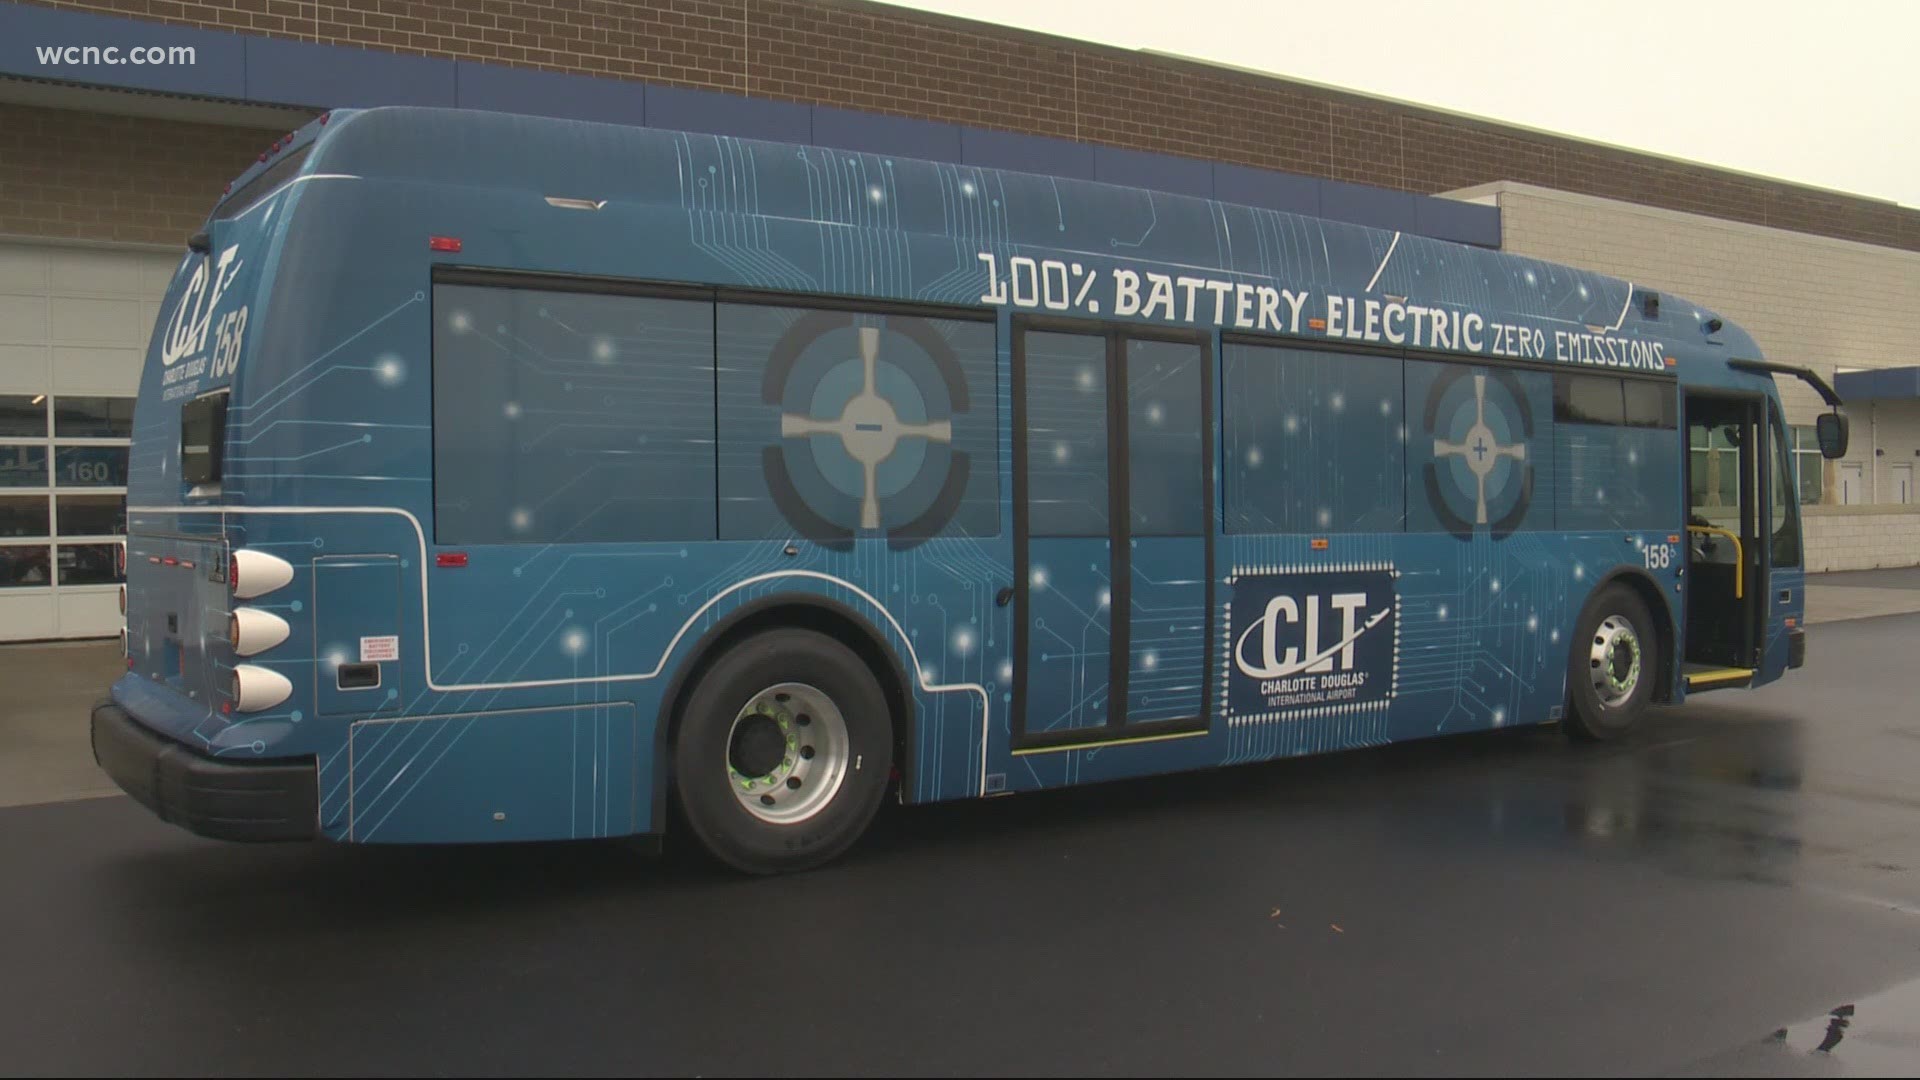 The airport now has five 100% electronic buses to help transport passengers to different terminals.